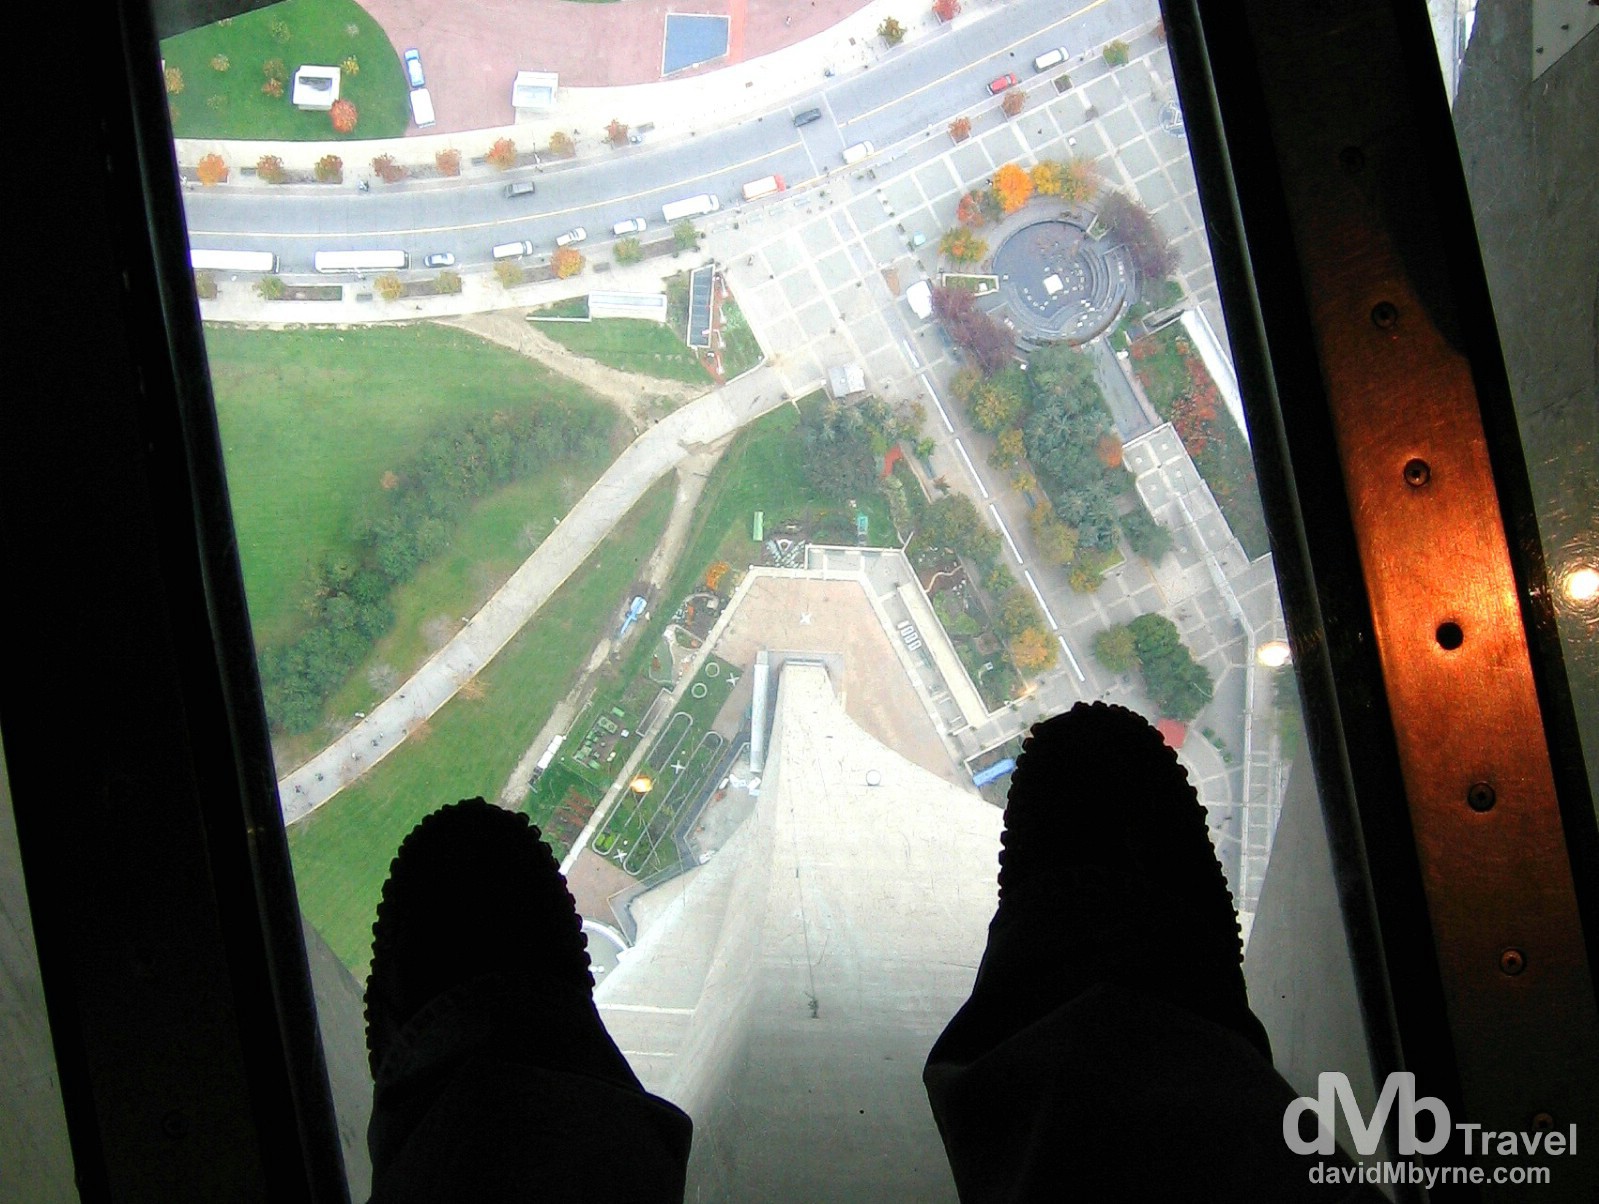 Standing on the glass floor of the viewing deck of the CN Tower in Toronto, Ontario, Canada. October 10, 2006.